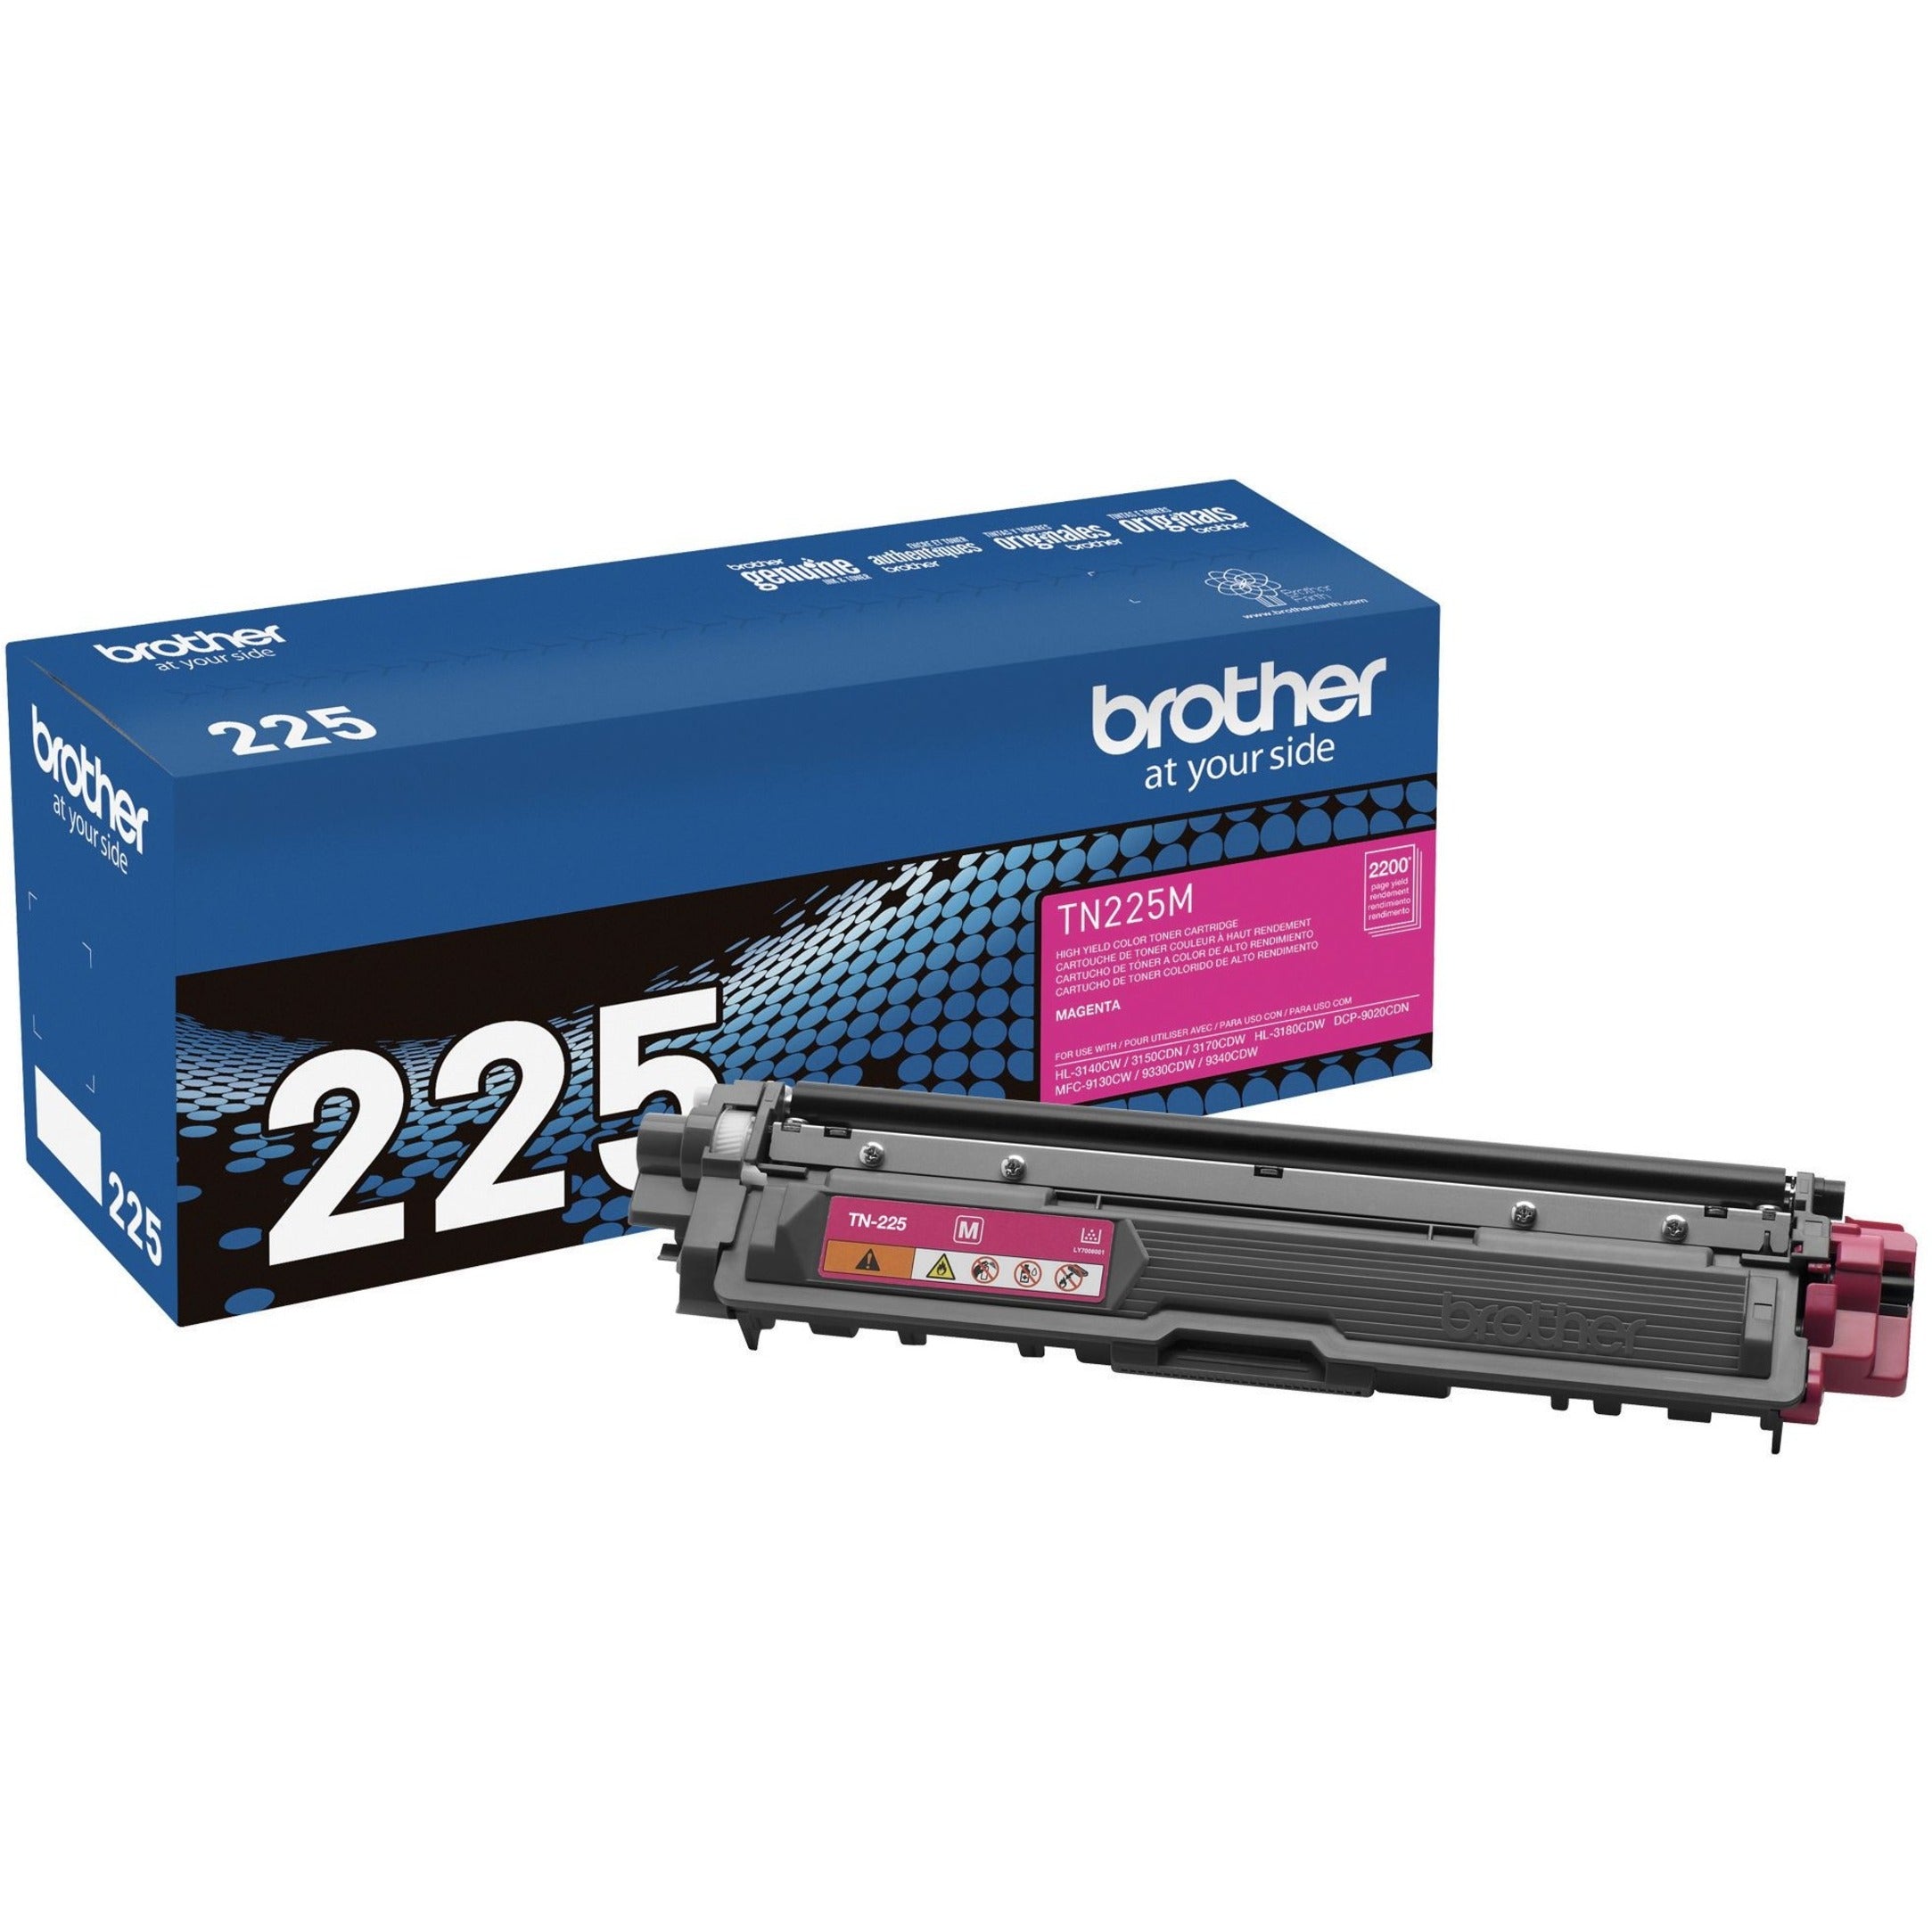 Brother TN225M Toner Cartridge, High Yield, Magenta, 2200 Page Yield